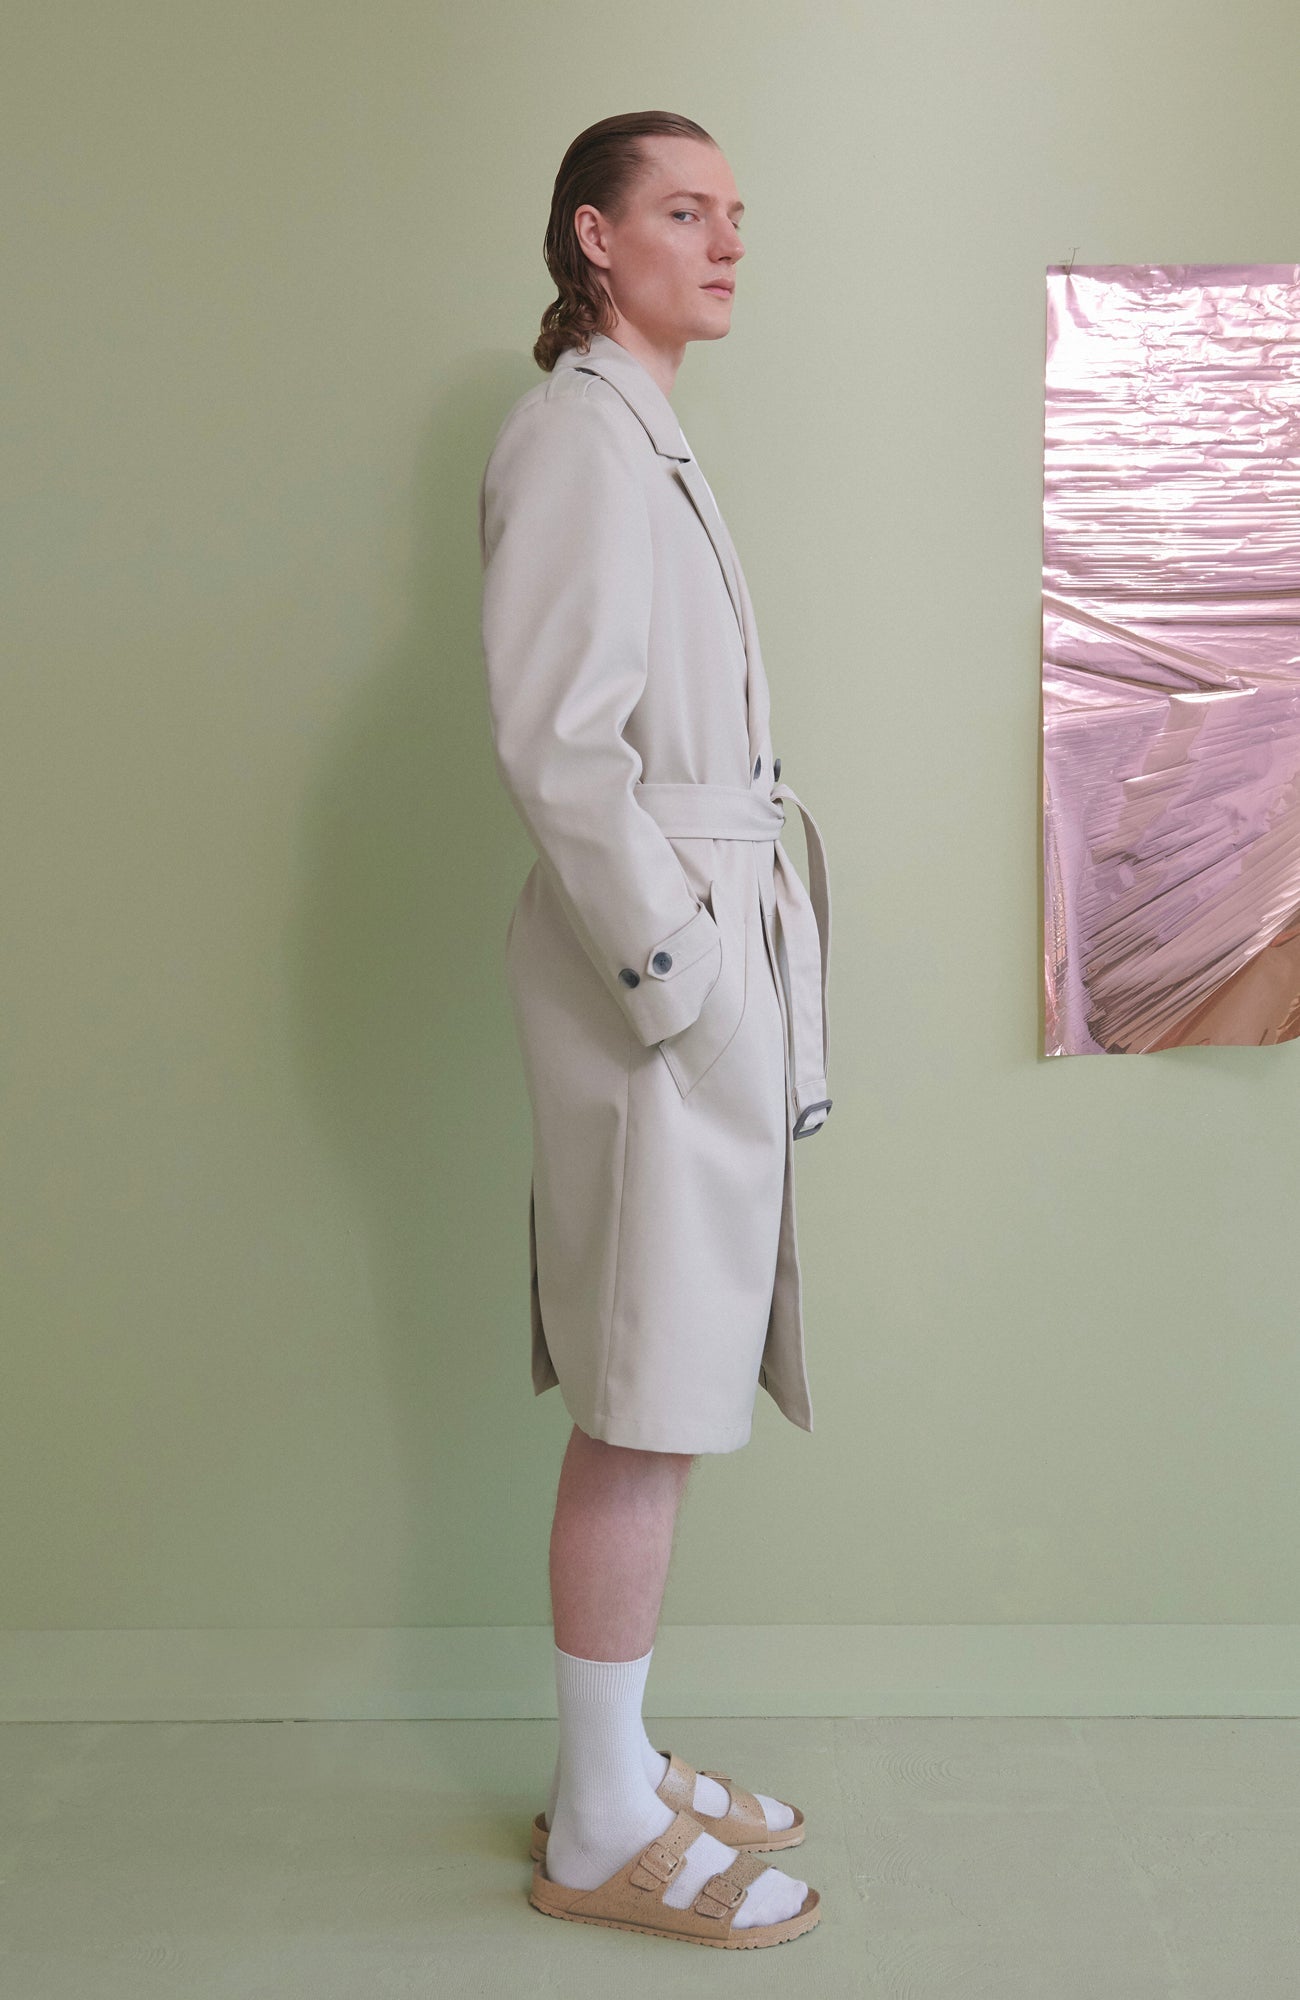 LIMITED EDITION: LUCAS LIGHT BEIGE TRENCH COAT - MENS - Cardinal of Canada-CA - LIMITED EDITION: LUCAS LIGHT BEIGE DOUBLE BREAST TRENCH COAT 44.5 INCH LENGTH